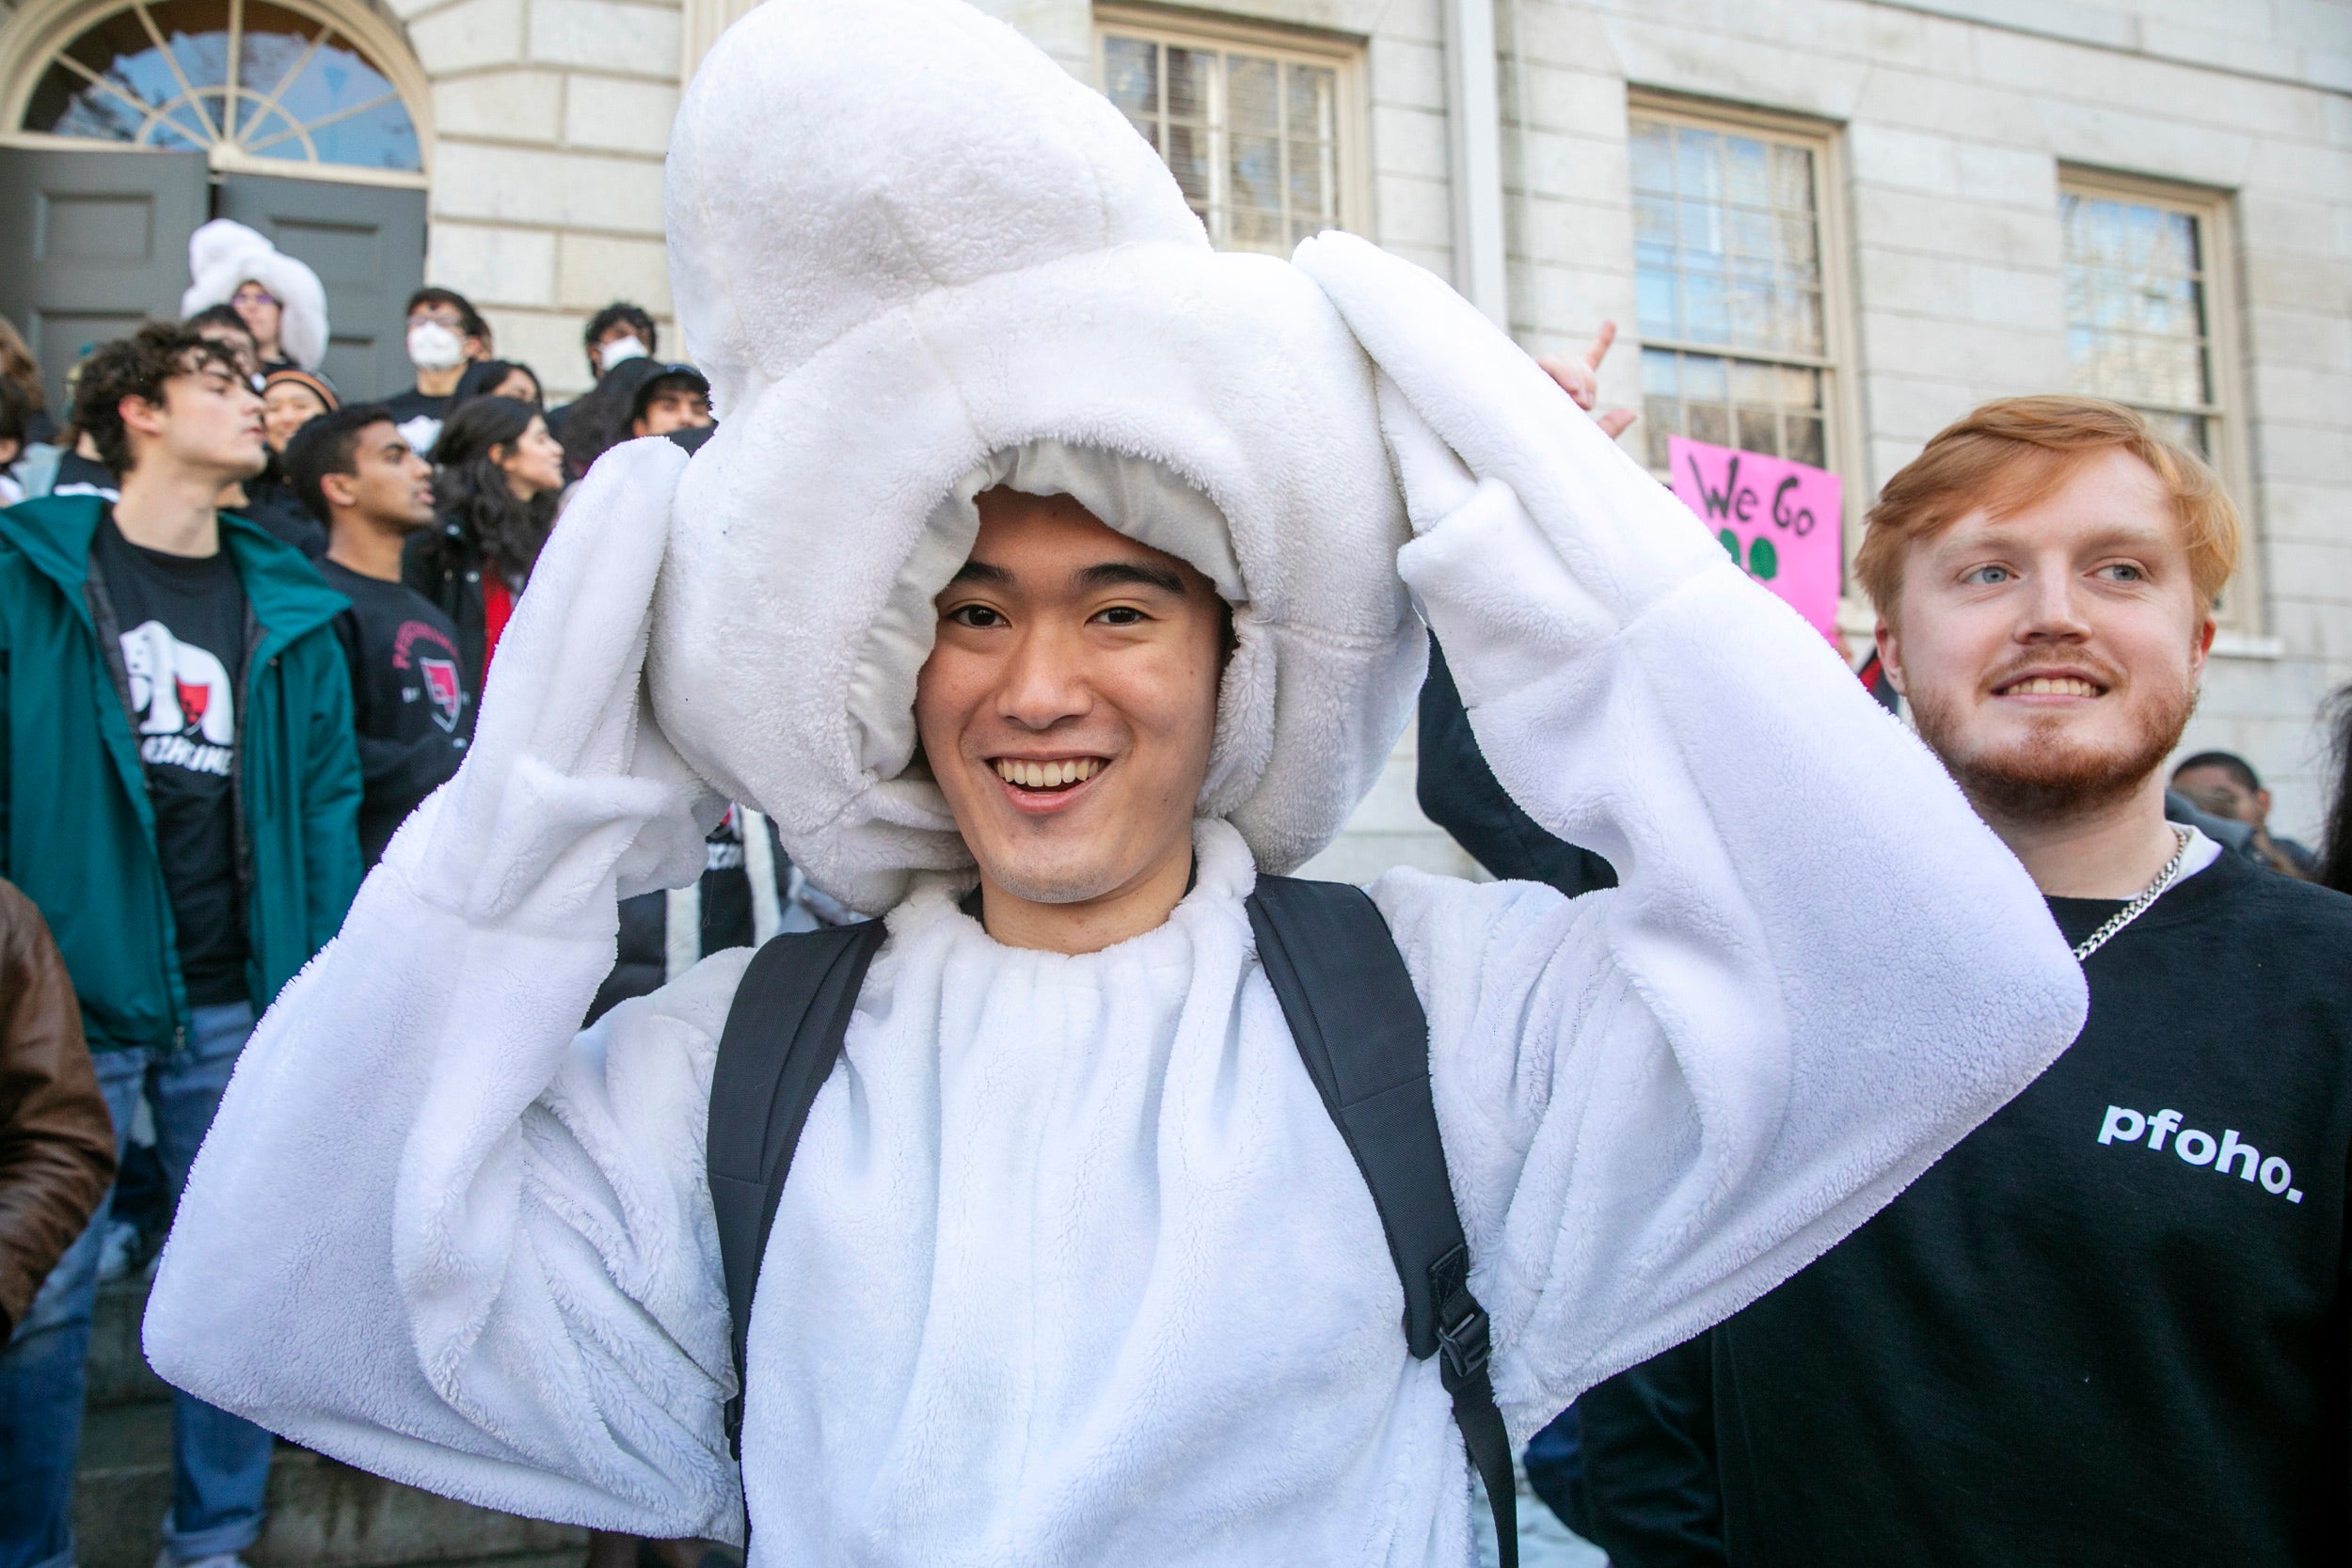 Todd Qiu ’22 flashes a Pforzheimer smile for the camera while dressed as the House polar bear mascot.